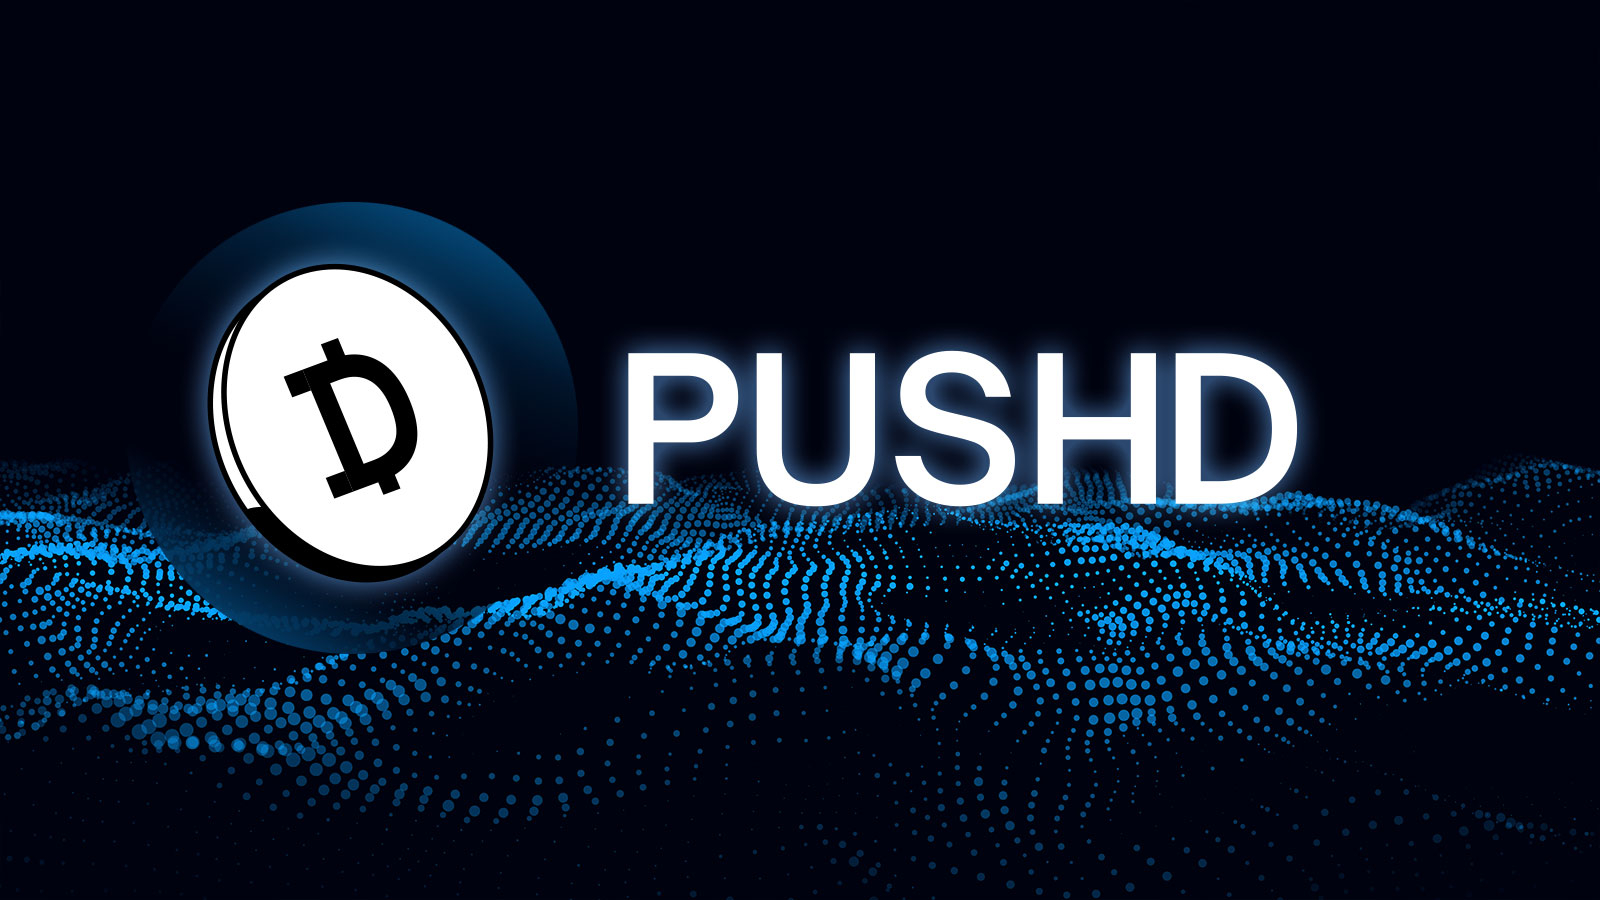 Pushd (PUSHD) Pre-Sale Welcomed by Enthusiasts as Polkadot (DOT), Tron (TRX) Major Altcoins Remain Strong